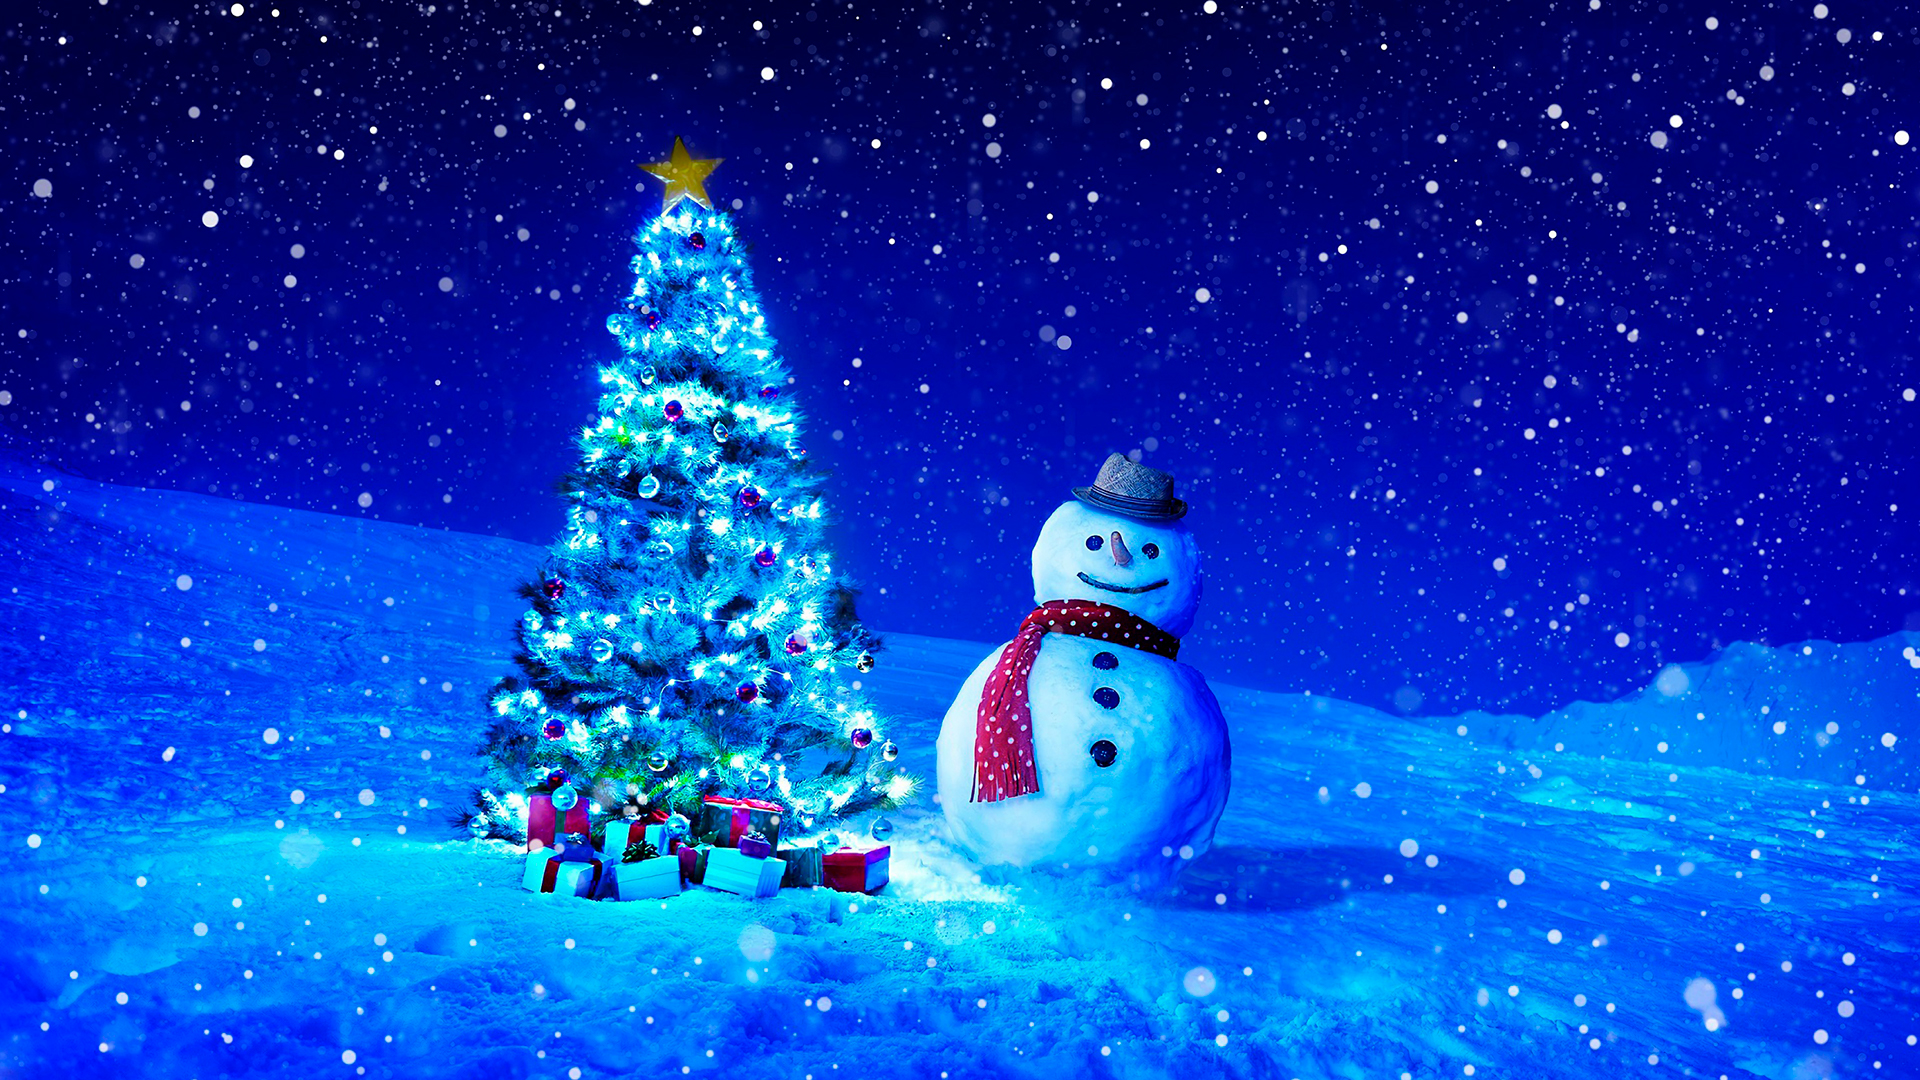 Snowman near the Christmas tree with gifts wallpaper Themes10.win